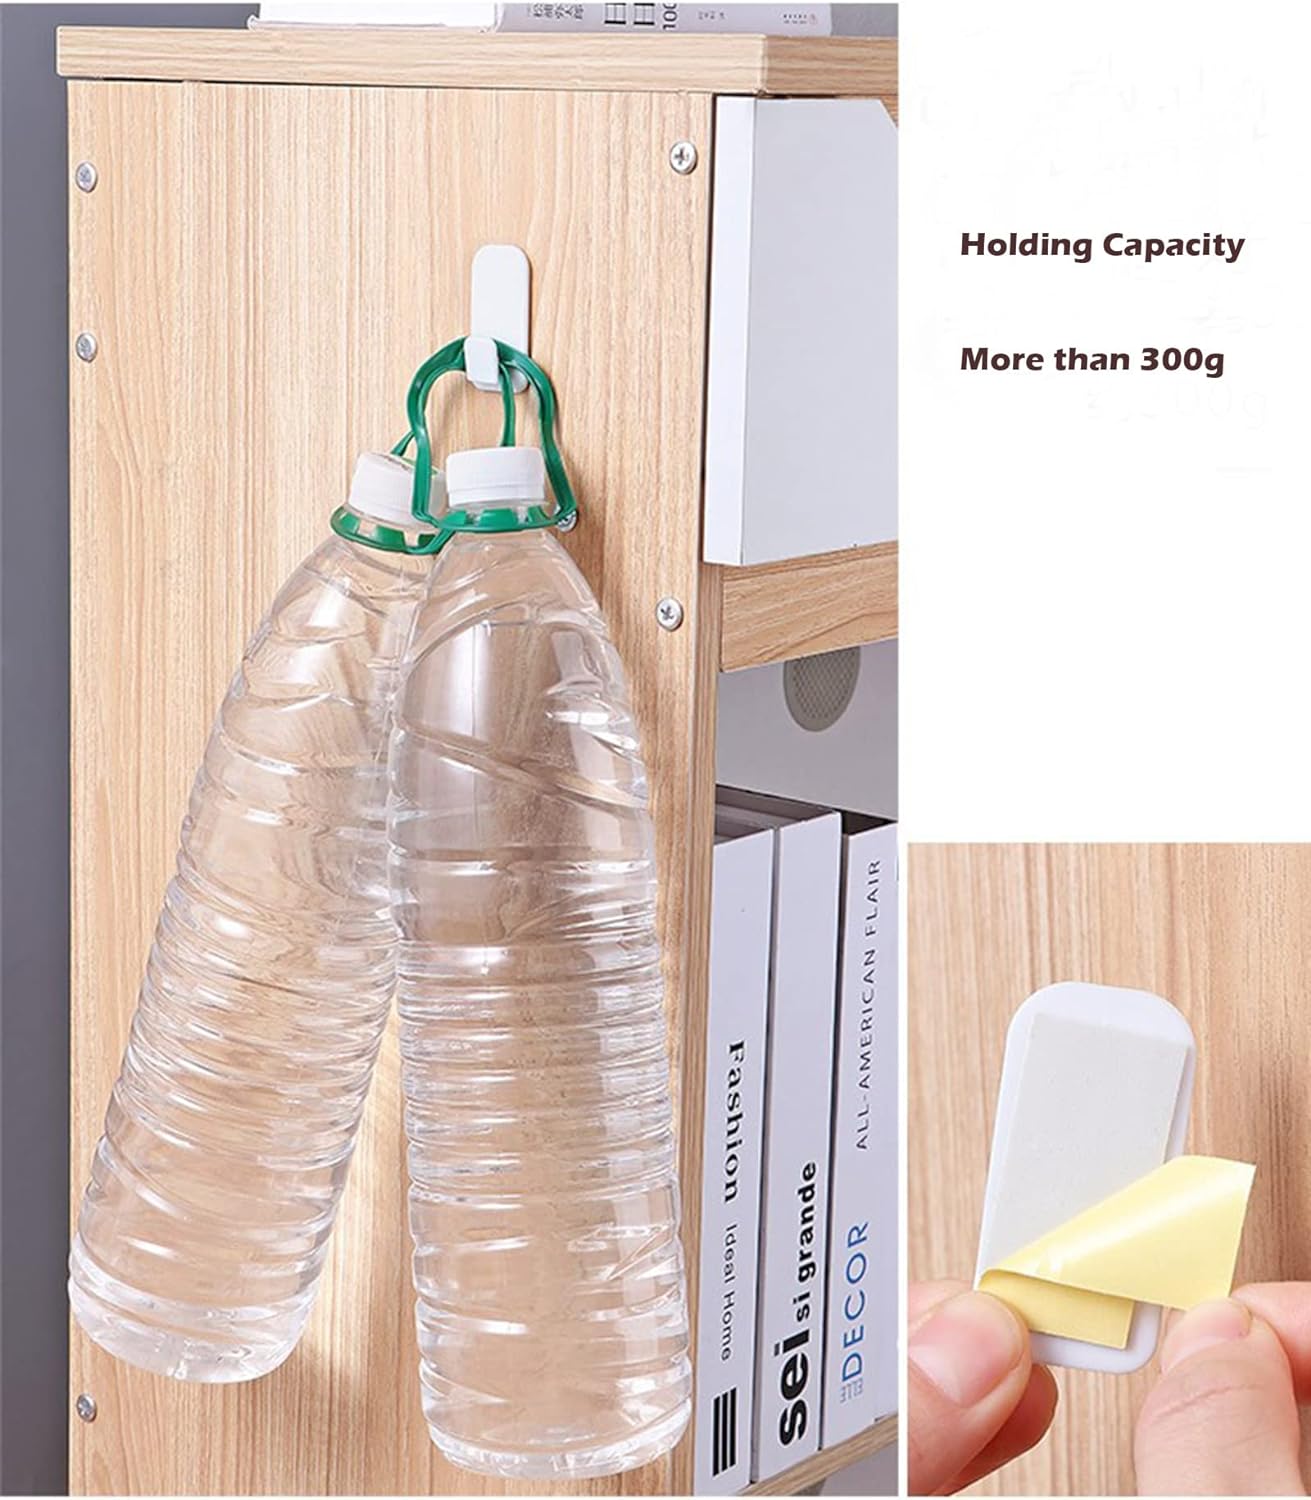 Remote Control Holder Hook Wall Mount Storage Sticky Plastic Hook with Strong Self Adhesive and Hanging Buckle for TV Air Conditioning Remote Control Key Hanger - Deliverrpk